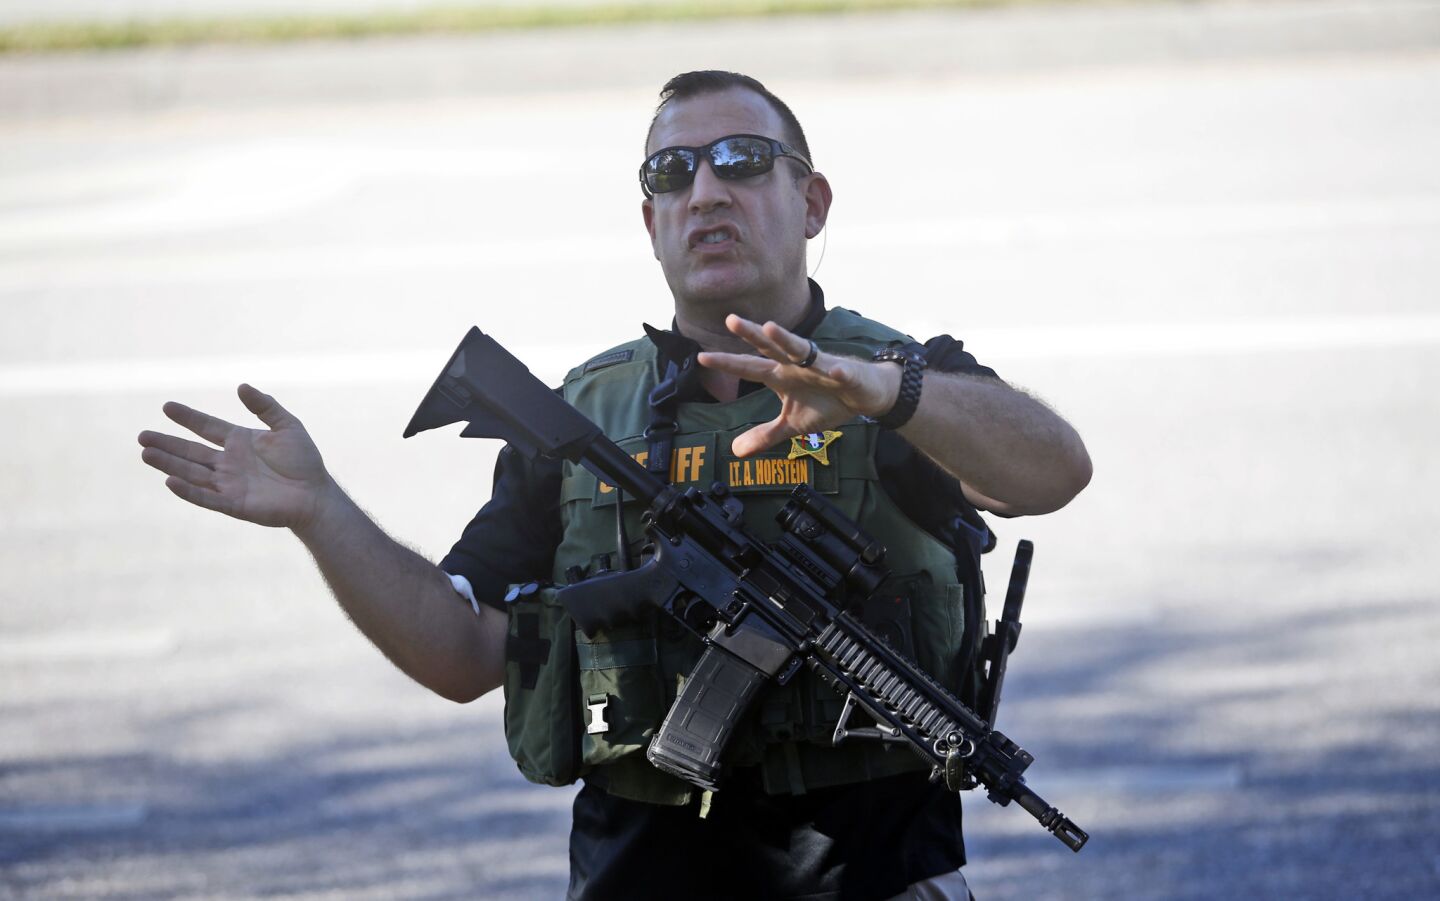 A law enforcement officer tells anxious family members to move back after a shooting at Marjory Stoneman Douglas High School in Parkland, Fla.